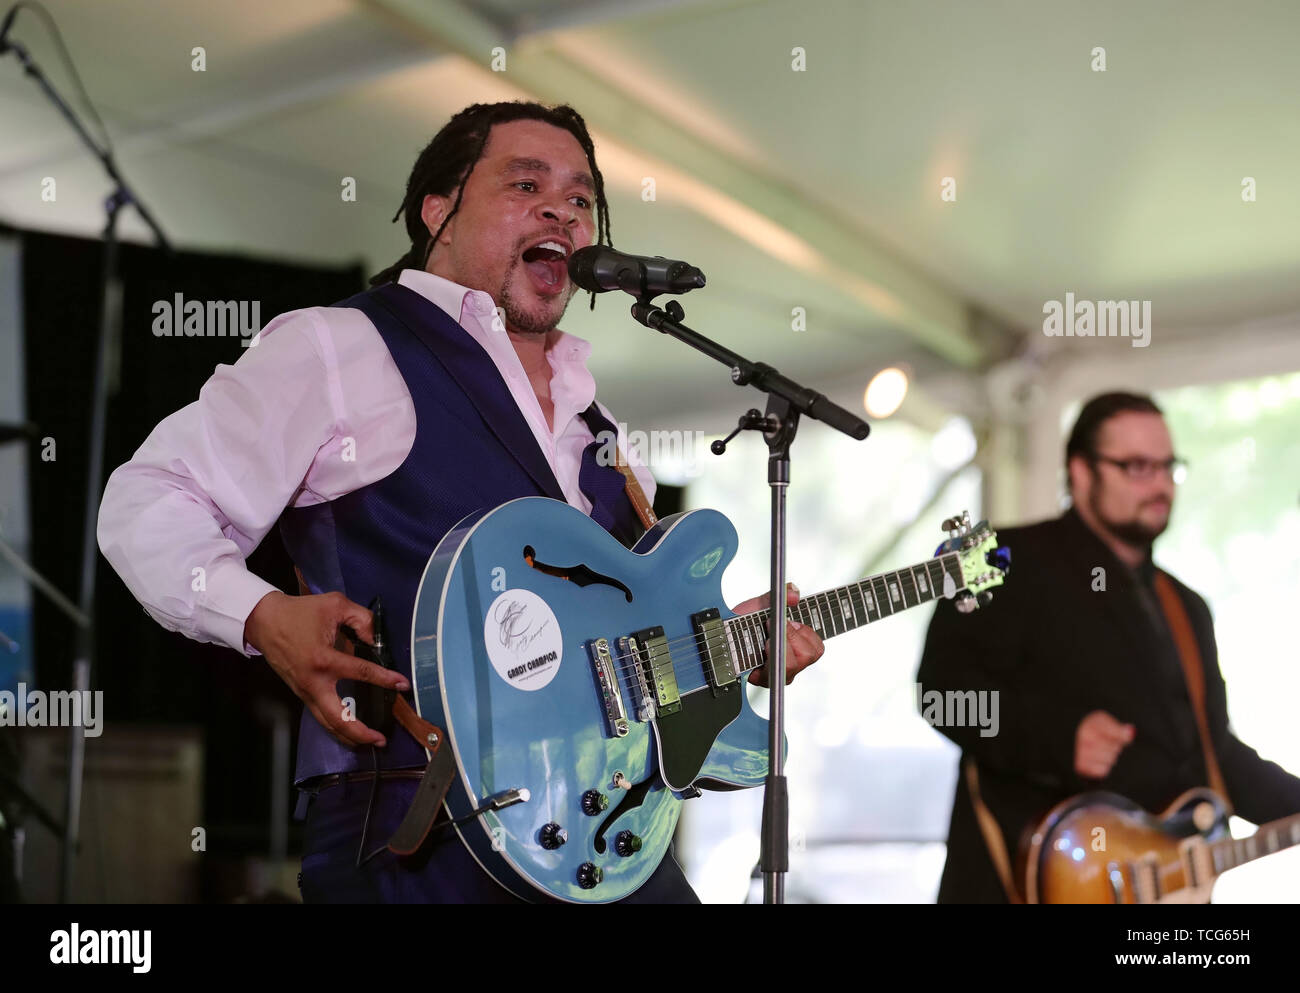 Chicago, USA. 7th June, 2019. Blues singer and guitarist Grady Champion performs during the yearly Chicago Blues Festival in Chicago, the United States, on June 7, 2019. The 36th Chicago Blues Festival kicked off Friday at Millennium Park in downtown Chicago. The three-day music festival is free and open to visitors. Credit: Wang Ping/Xinhua/Alamy Live News Stock Photo